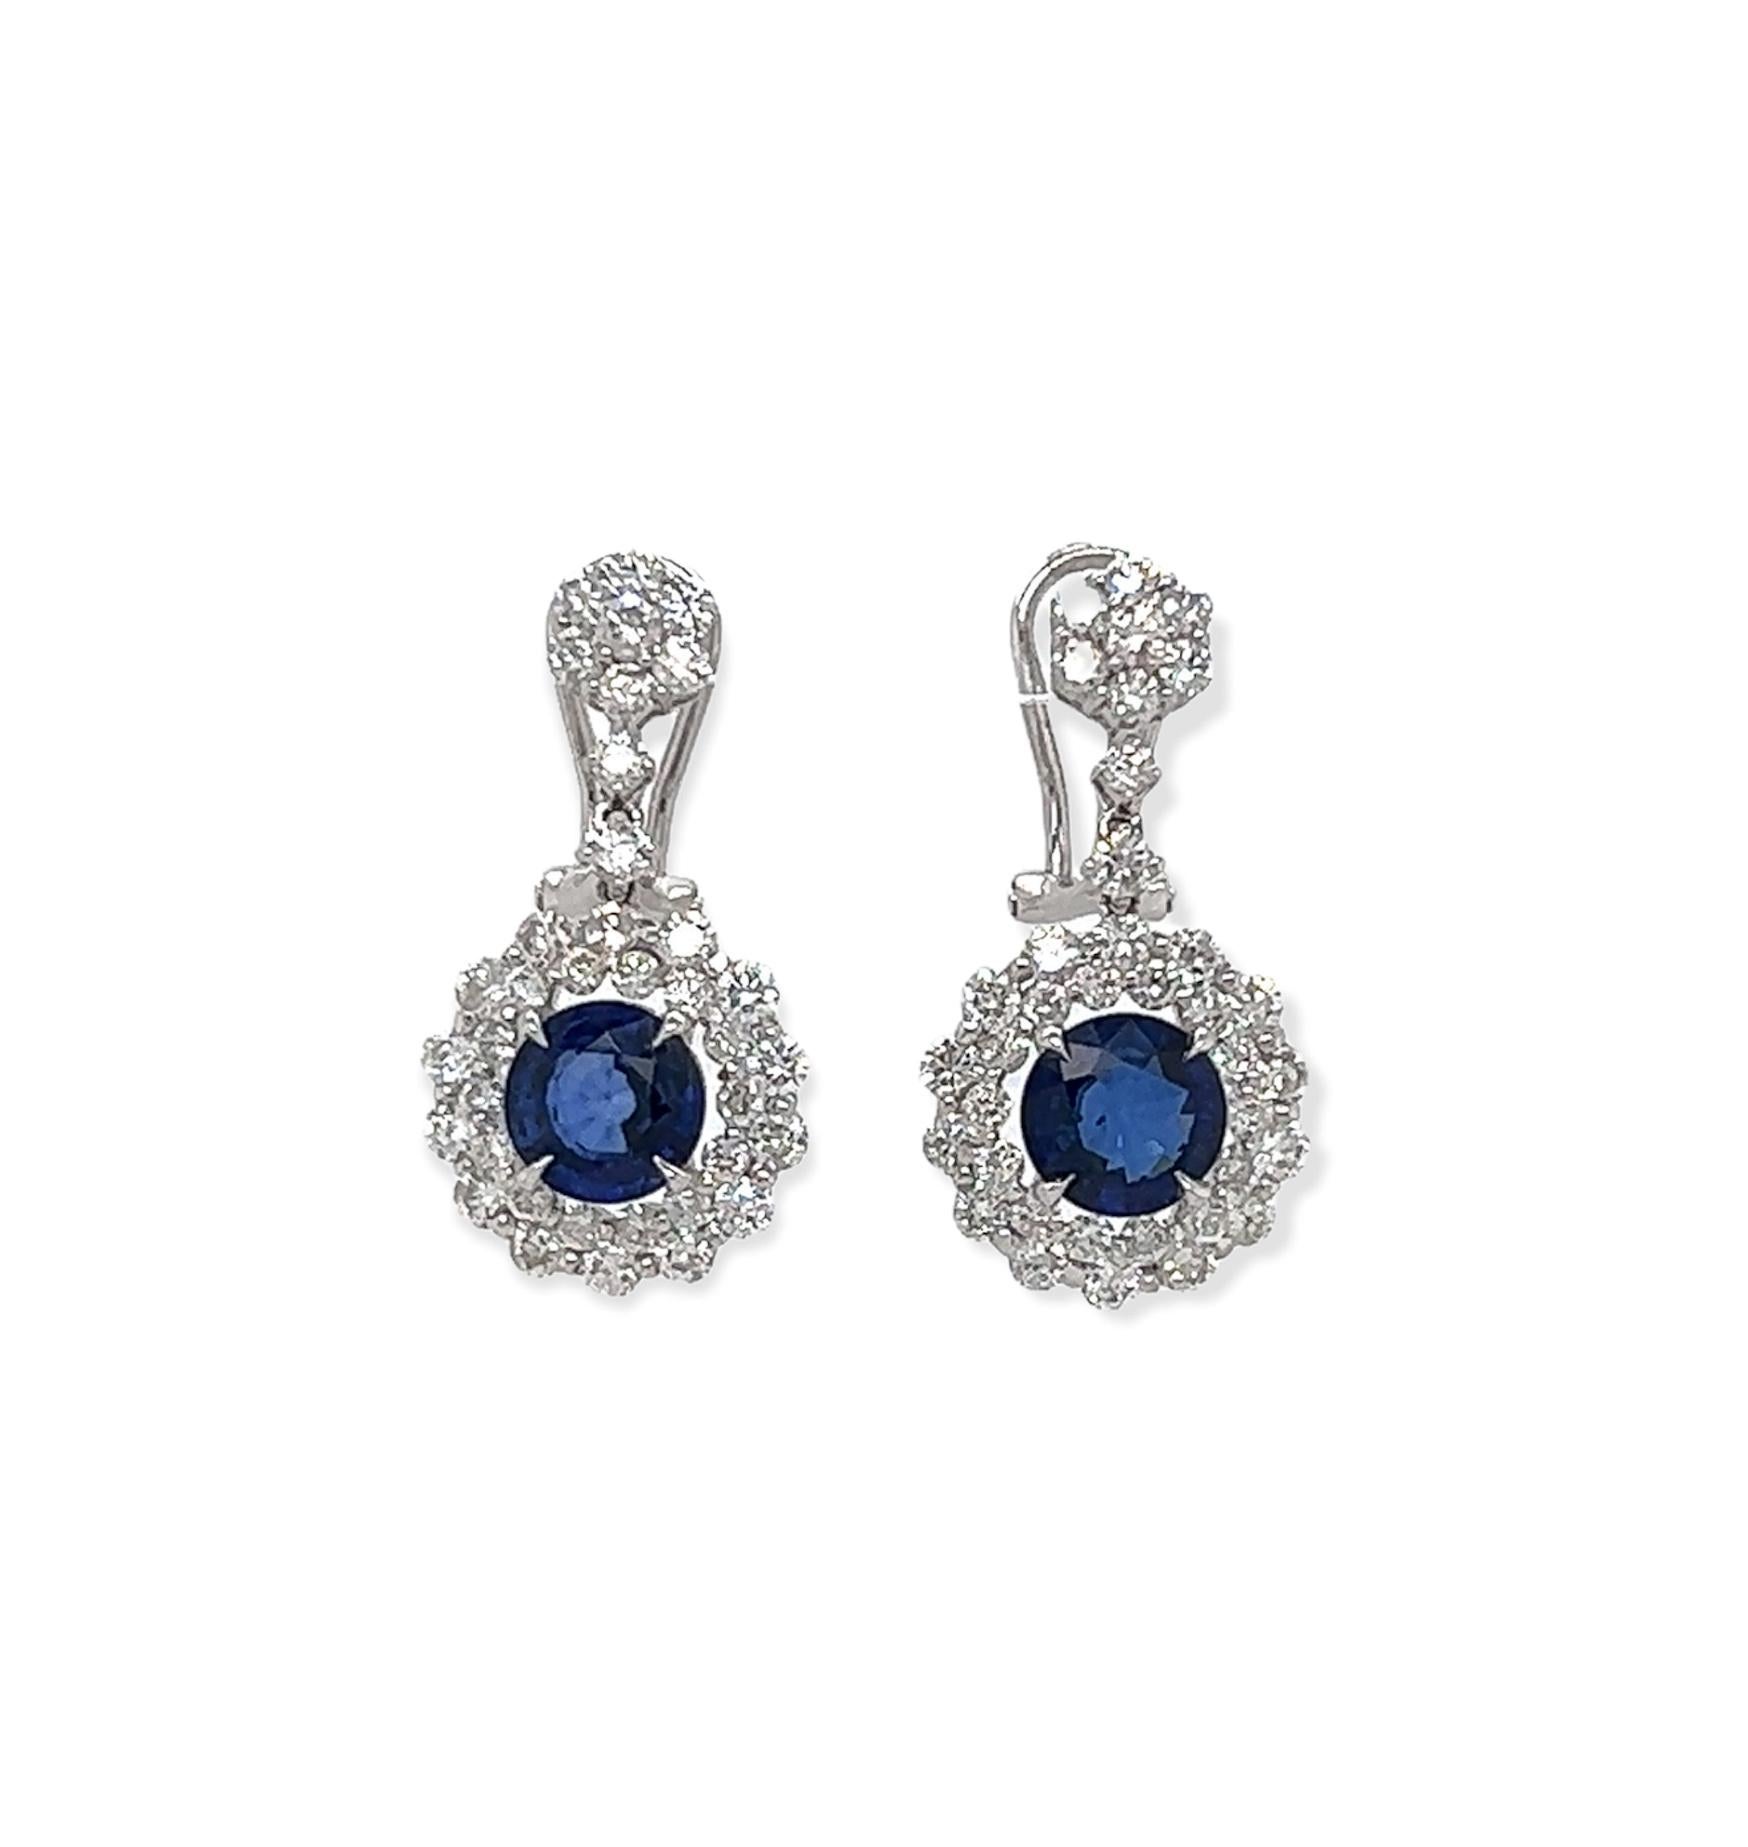 5.71 Total Carat Blue Sapphire Drop Earrings with Bezel set Double-Halo Diamond in 18K White Gold

These glamorous sapphire earrings are perfectly handcrafted from the finest diamonds, sapphire, and white gold. The aesthetics of blue sapphires